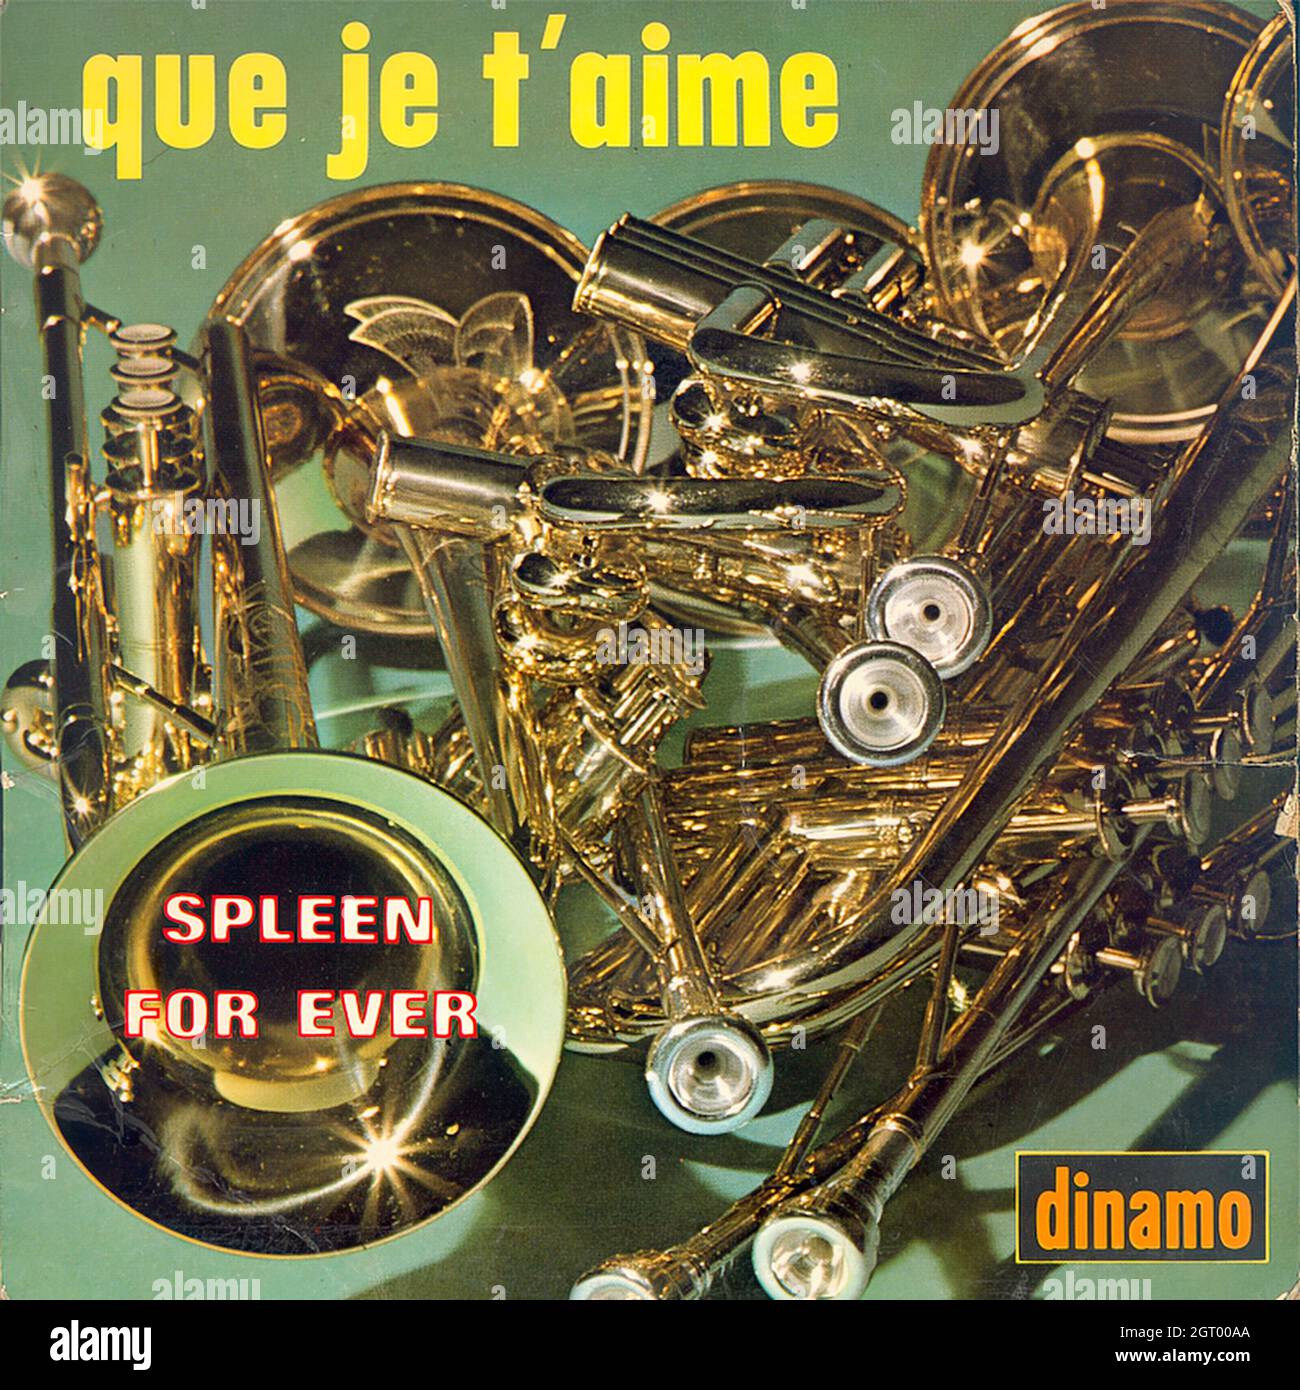 Que je t'aime (For ever - DINAMO) EP - Vintage Vinyl Record Cover Stock Photo